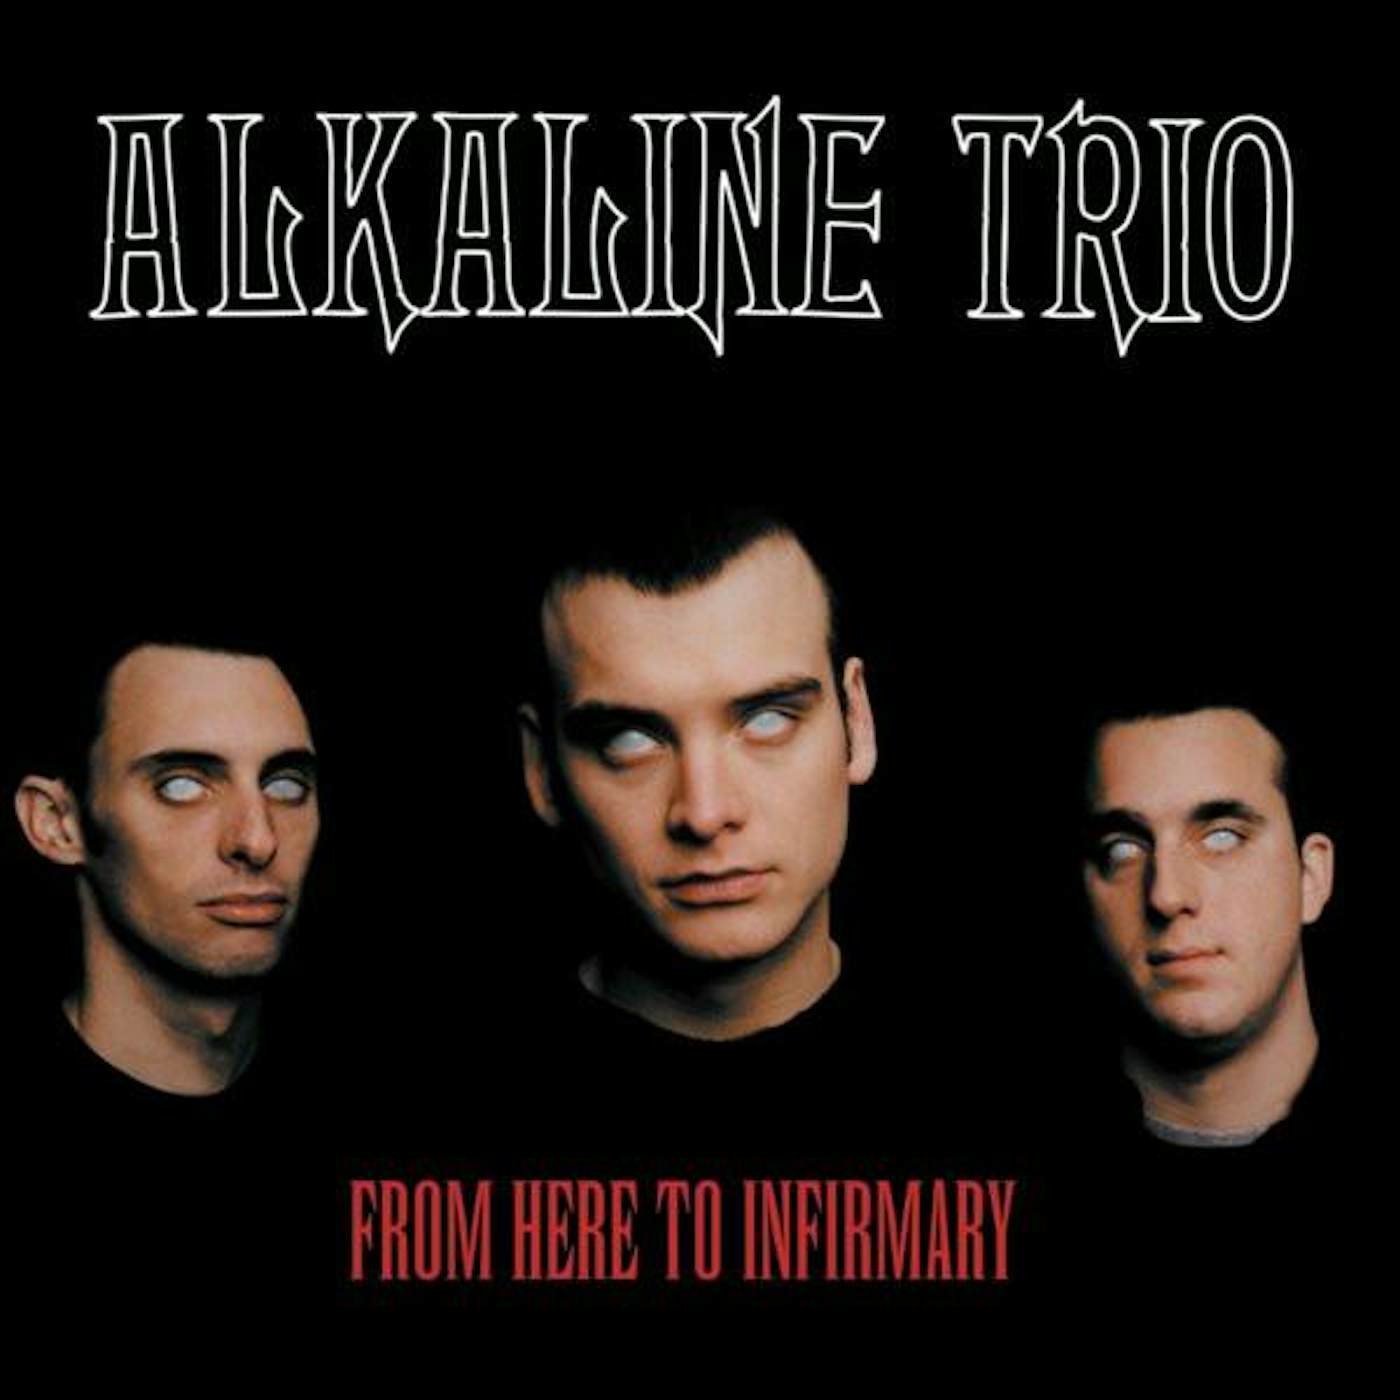 Alkaline Trio From Here To Infirmary Vinyl Record